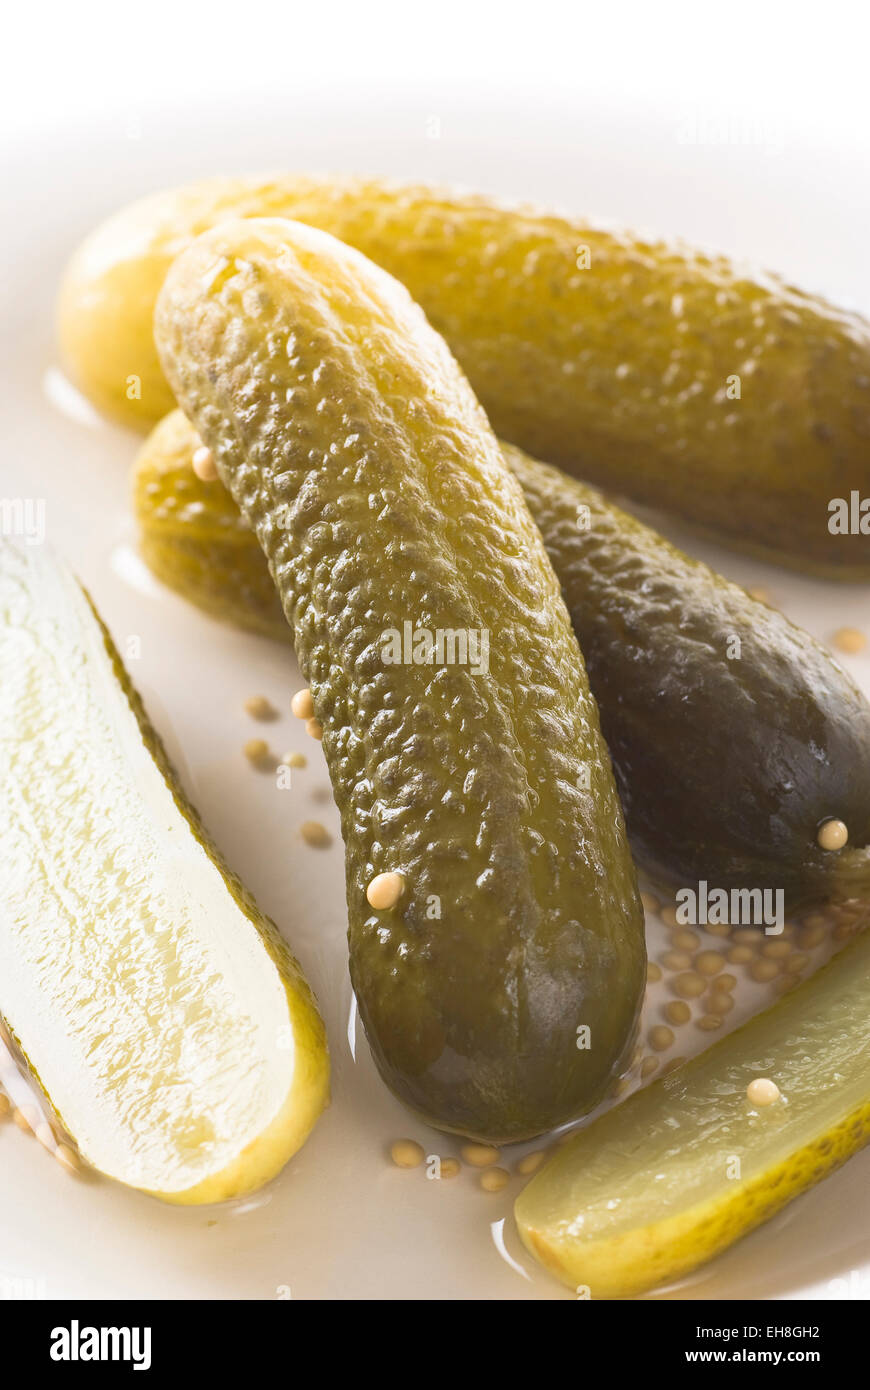 Dill pickle with mustard seed on a plate. Stock Photo